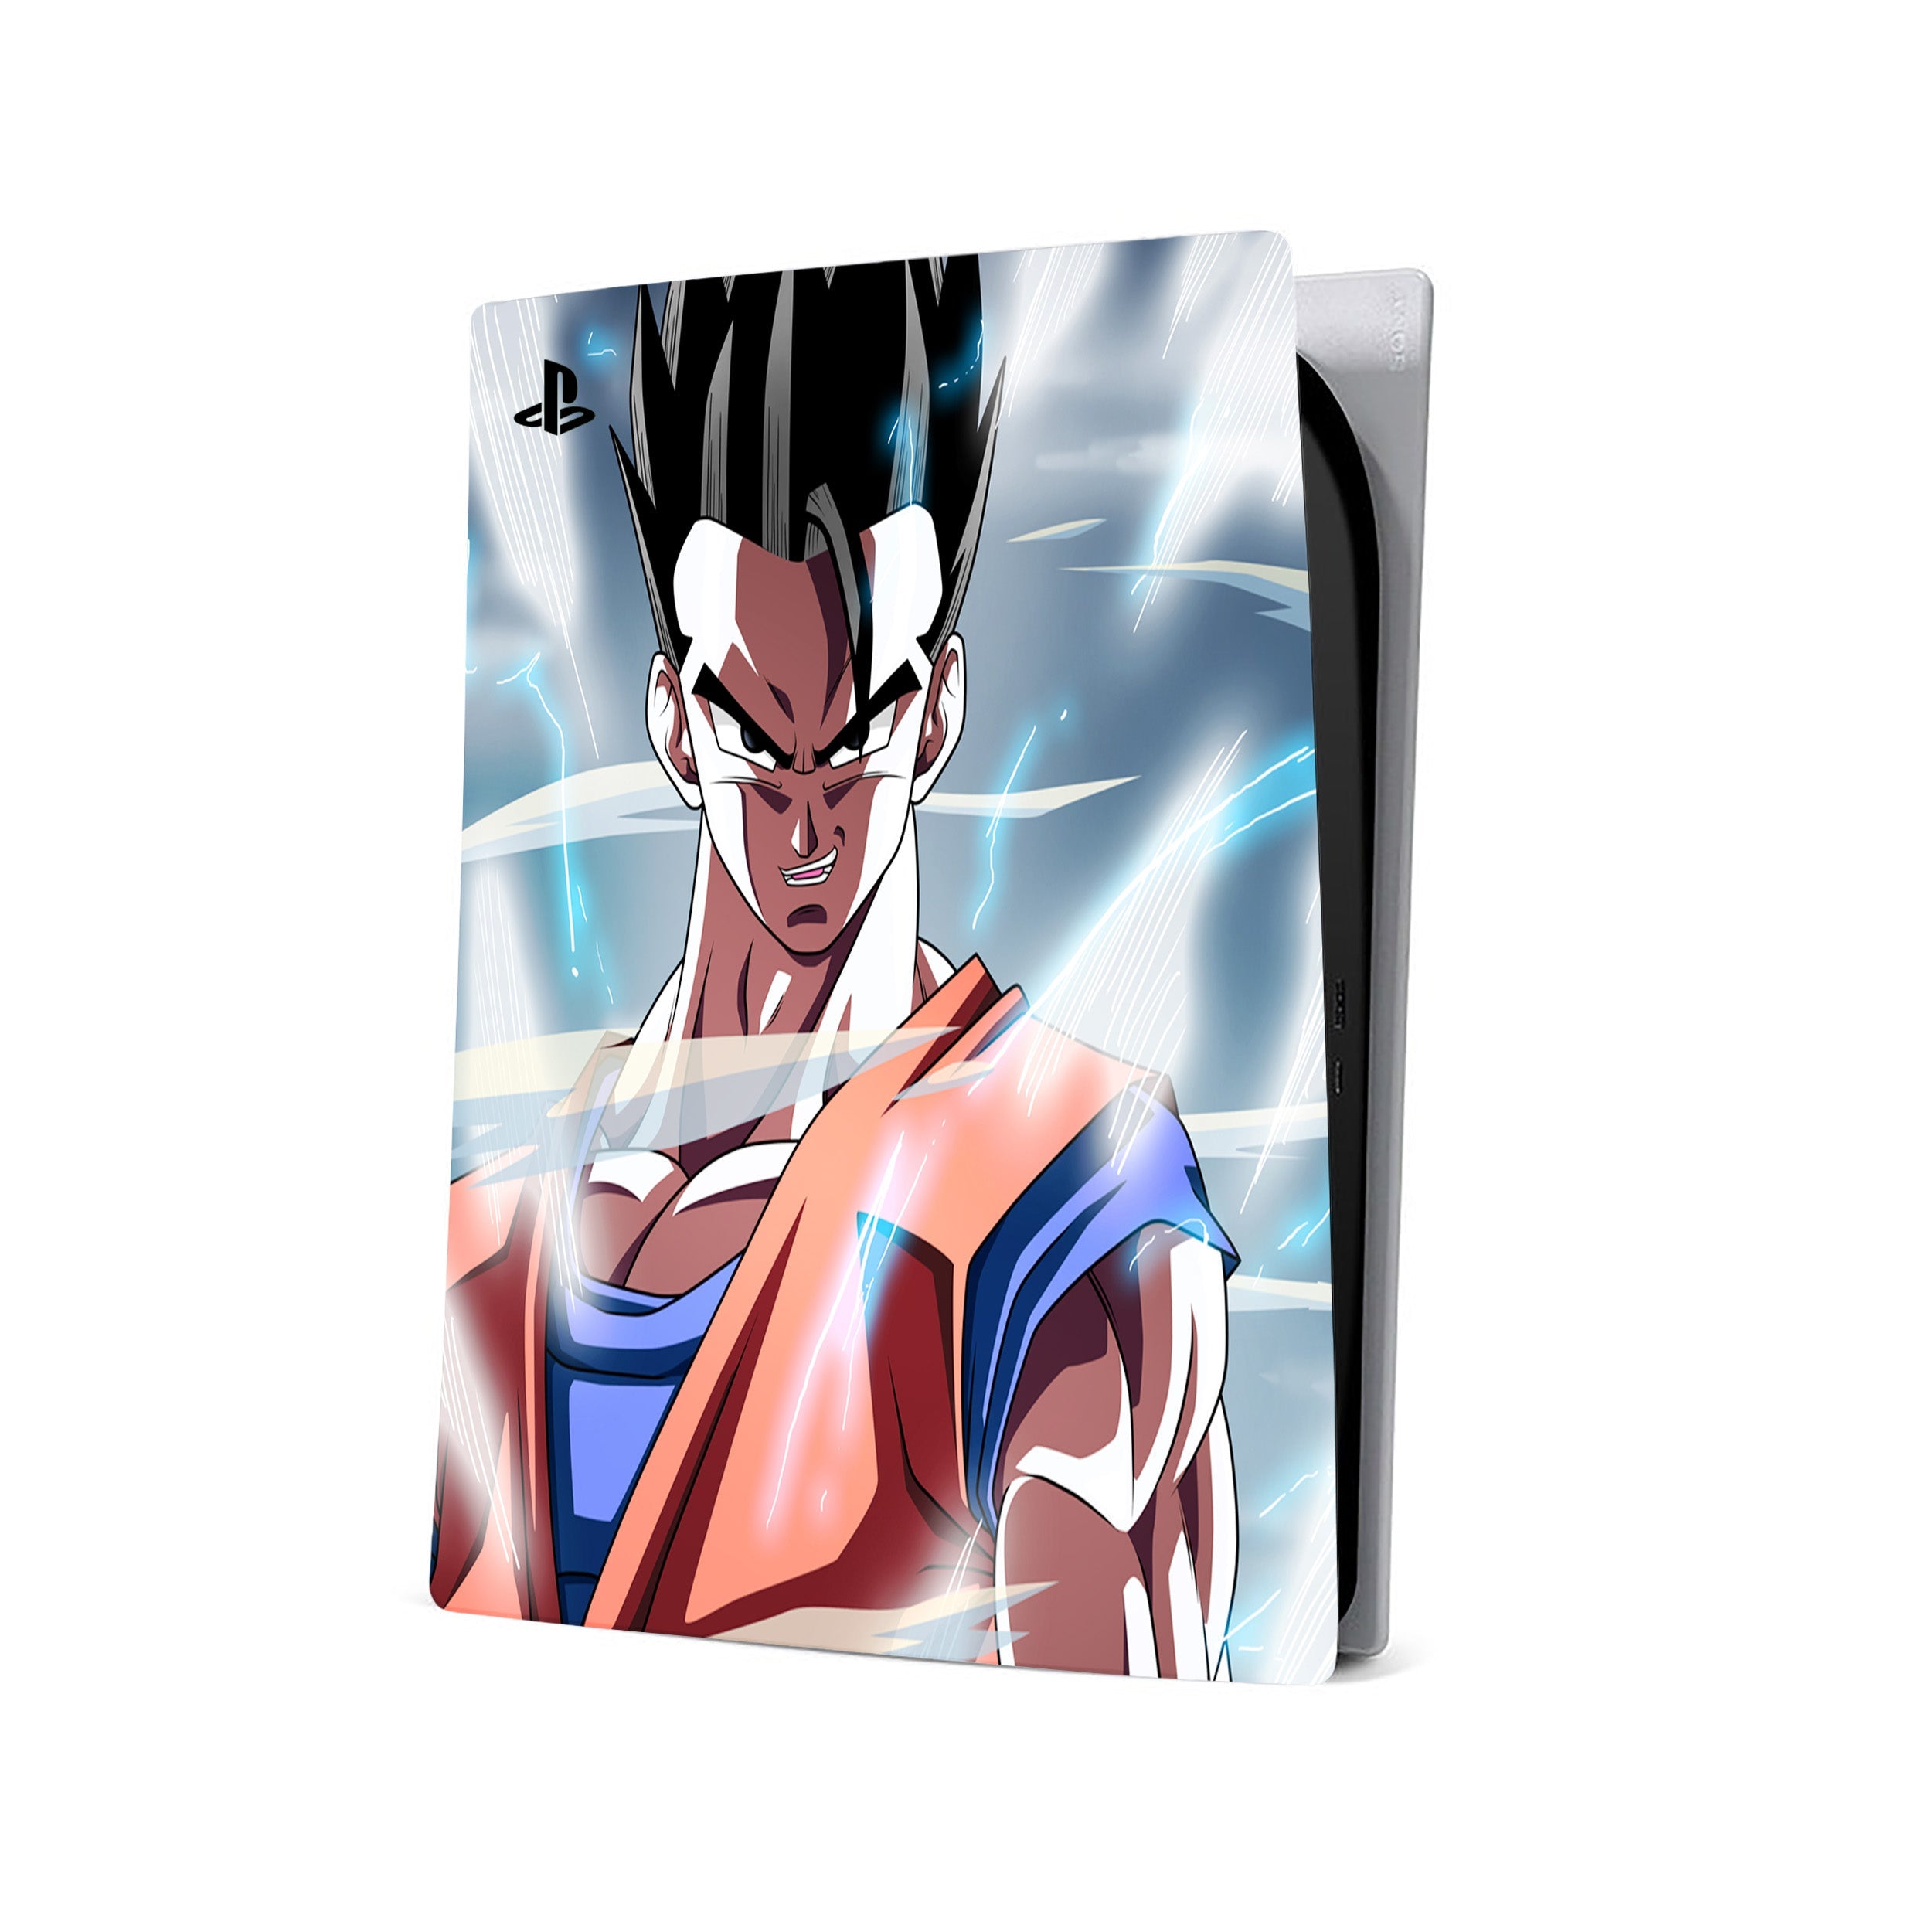 A video game skin featuring a Dragon Ball Z Gohan design for the PS5.